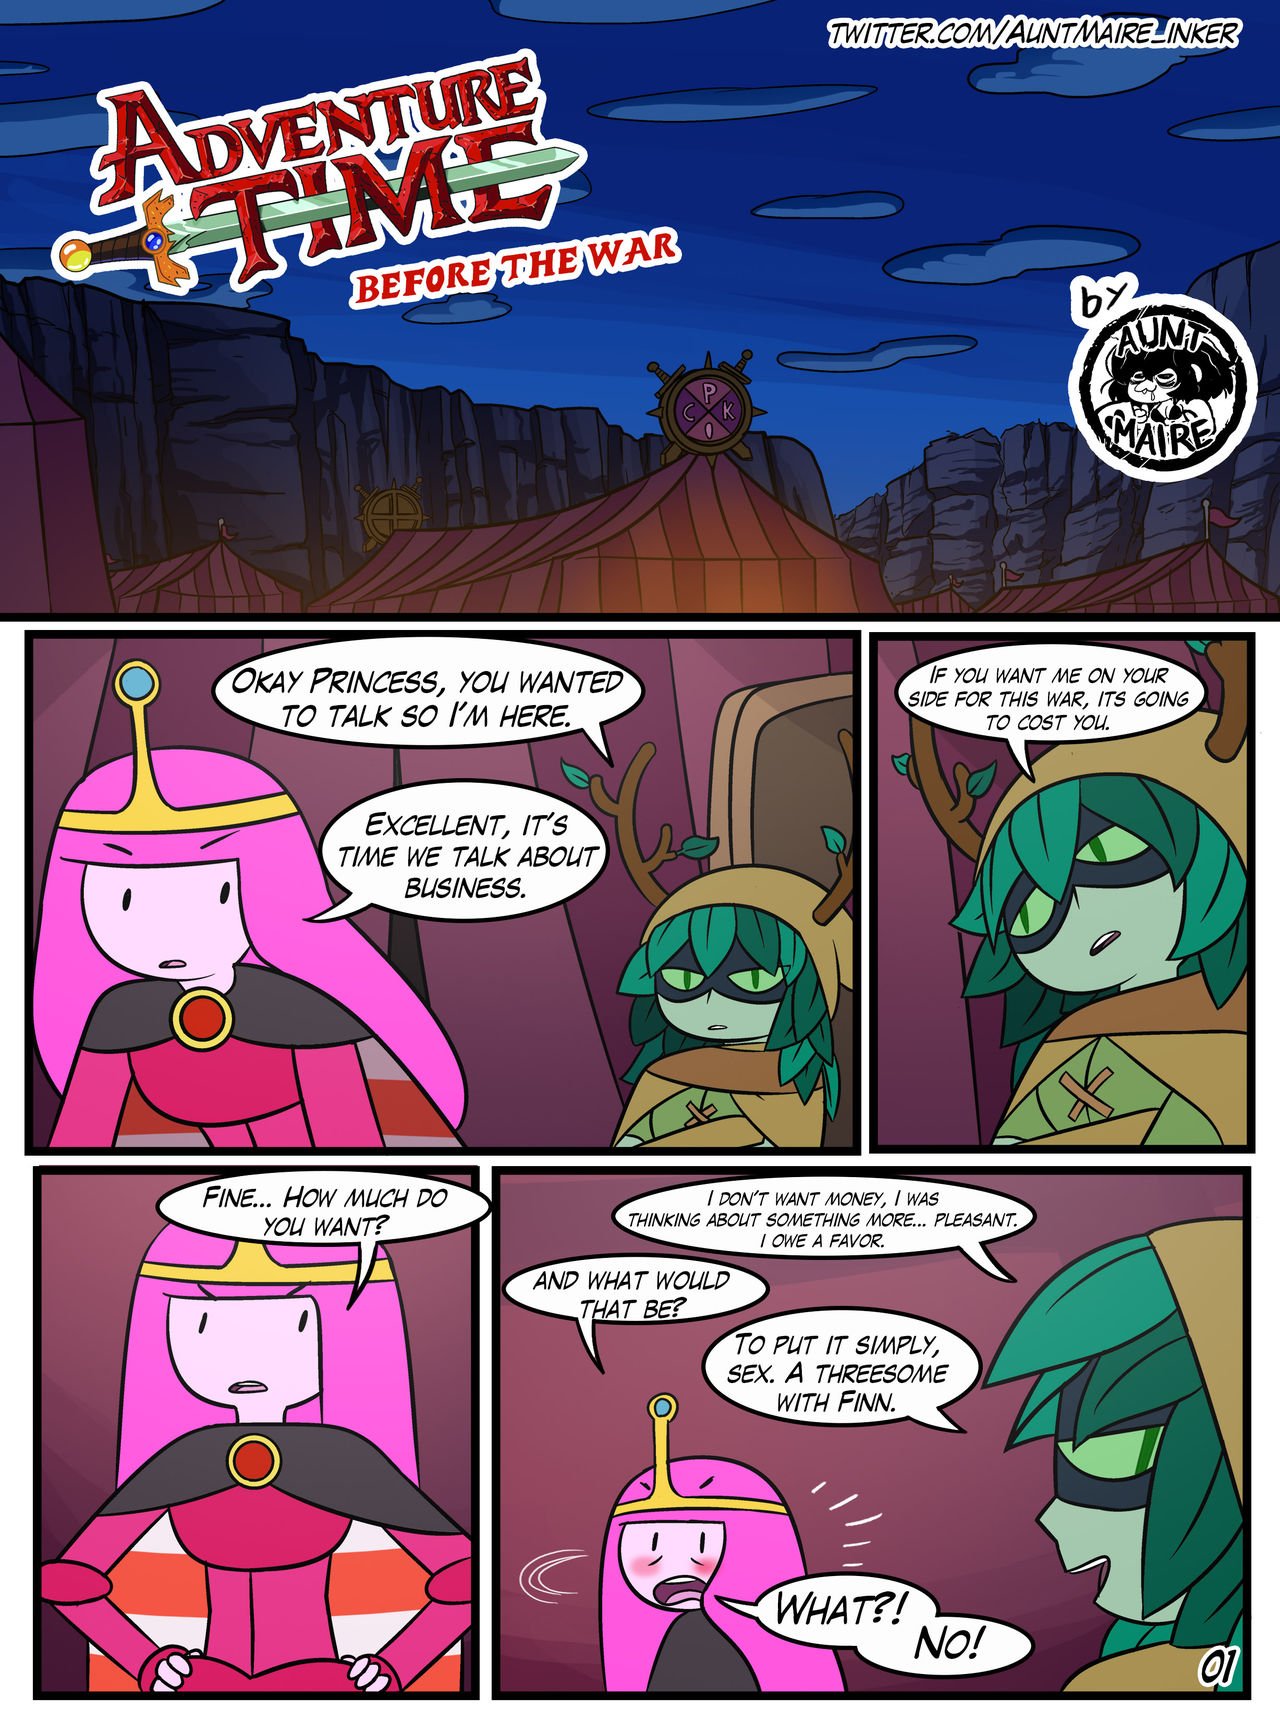 Adventure Time Finn And Marceline Have Sex - Adventure Time: Before the War - By Inkershike porn comic